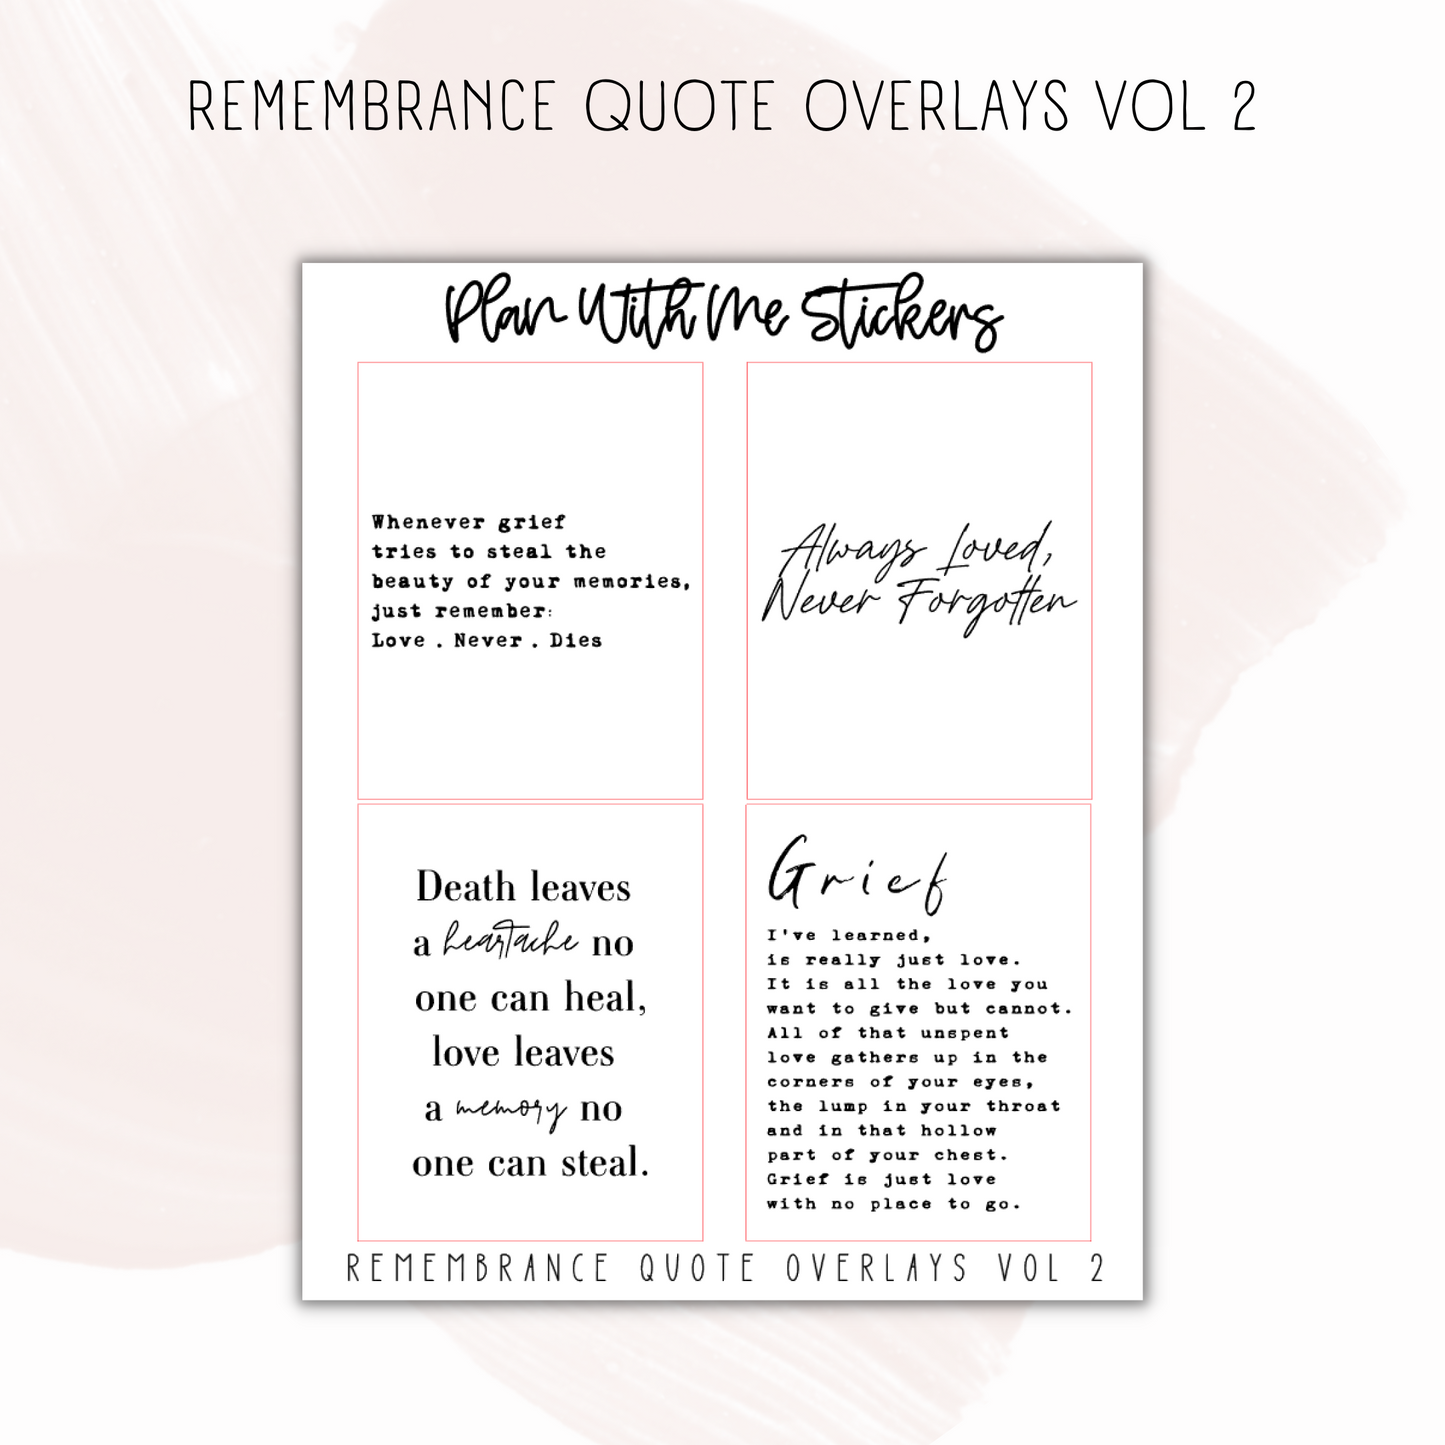 Remembrance Quote Overlays Vol 2